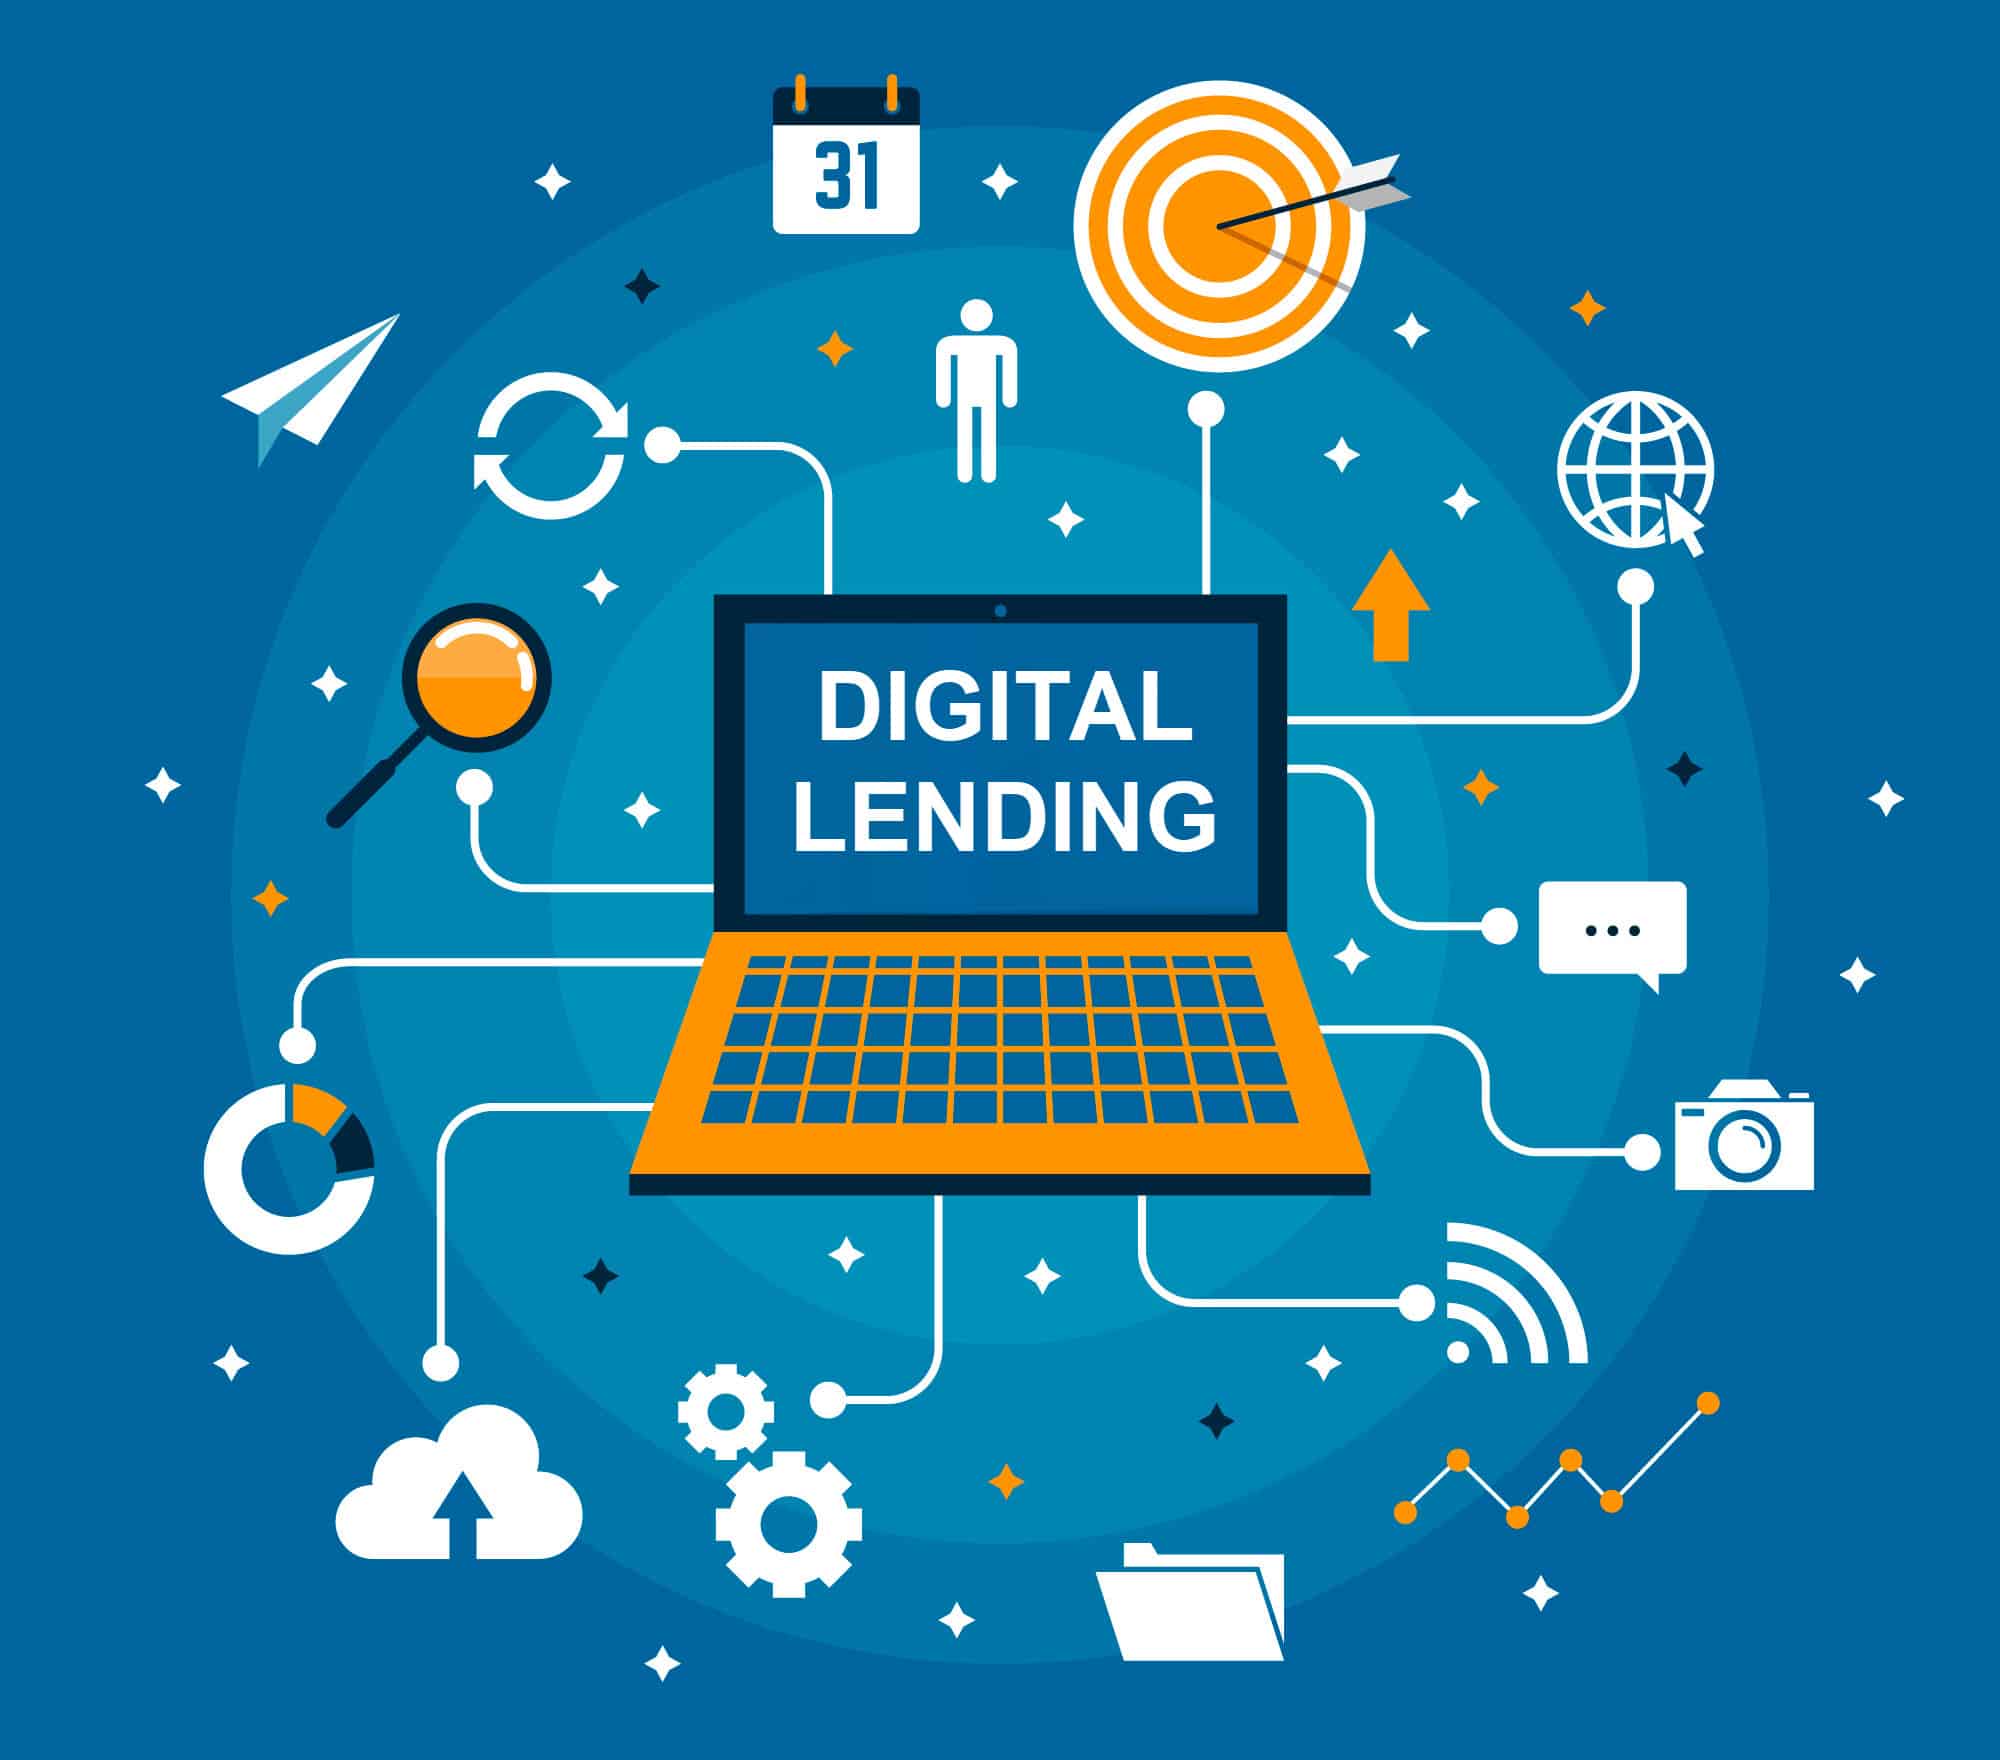 Digital Lending Market Is Estimated To Witness High Growth Owing To Accelerating Demand for Online Financing Services